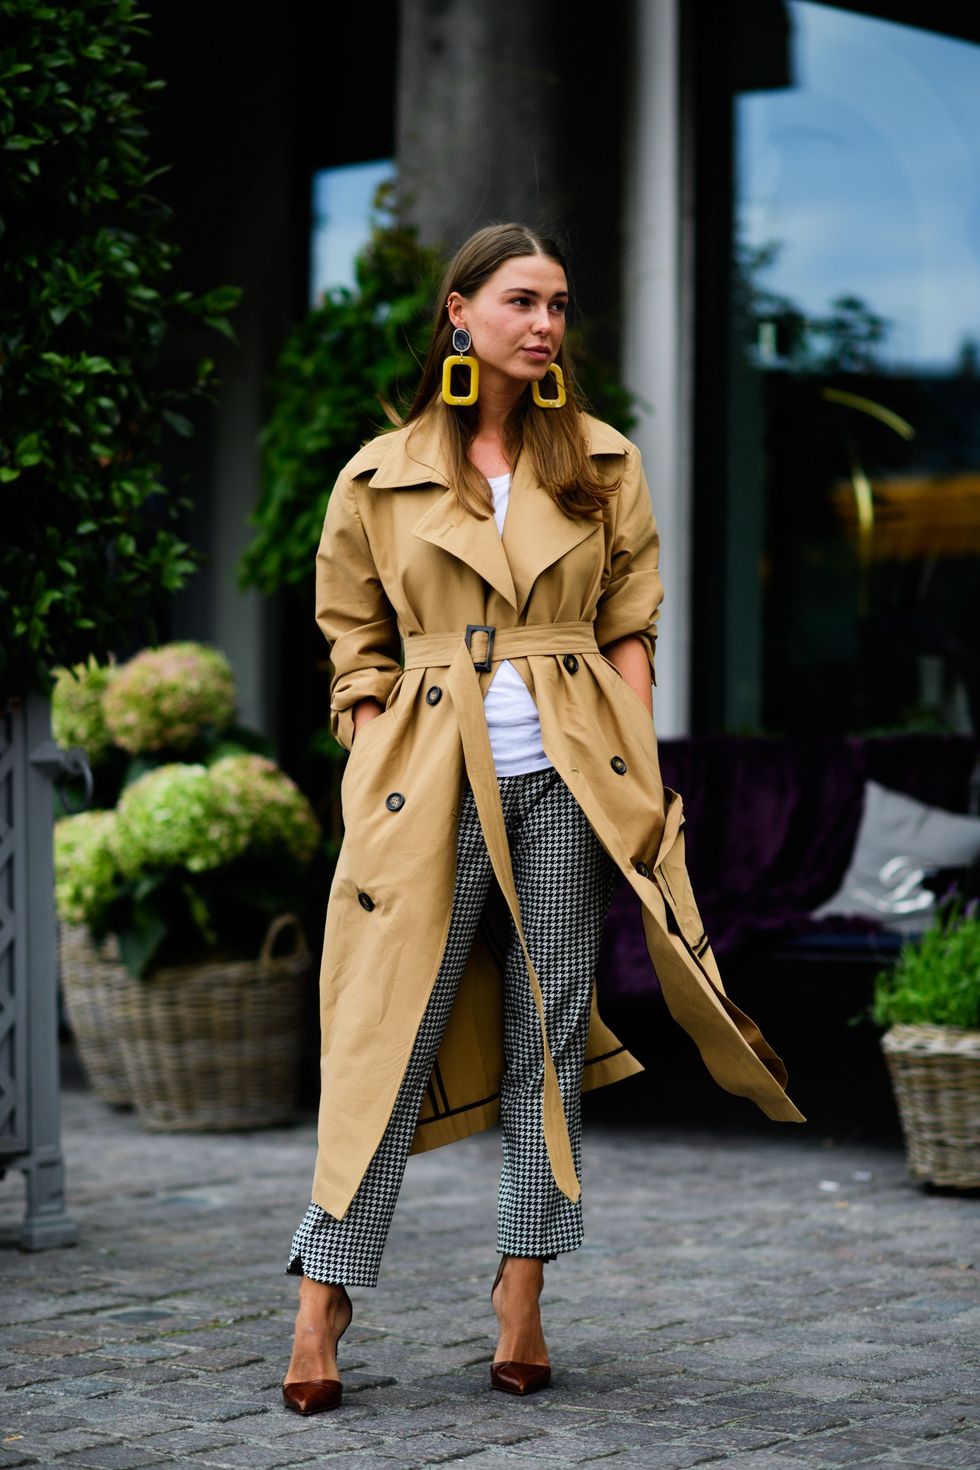 <p><em data-redactor-tag="em" data-verified="redactor">'While it sounds pretty basic to get a good trench coat for Spring this season the options are endless, especially from Cé<span class="redactor-invisible-space" data-verified="redactor" data-redactor-tag="span" data-redactor-class="redactor-invisible-space"></span>line which made some pretty great ones,'</em>&nbsp;zegt&nbsp;Larroude.</p>